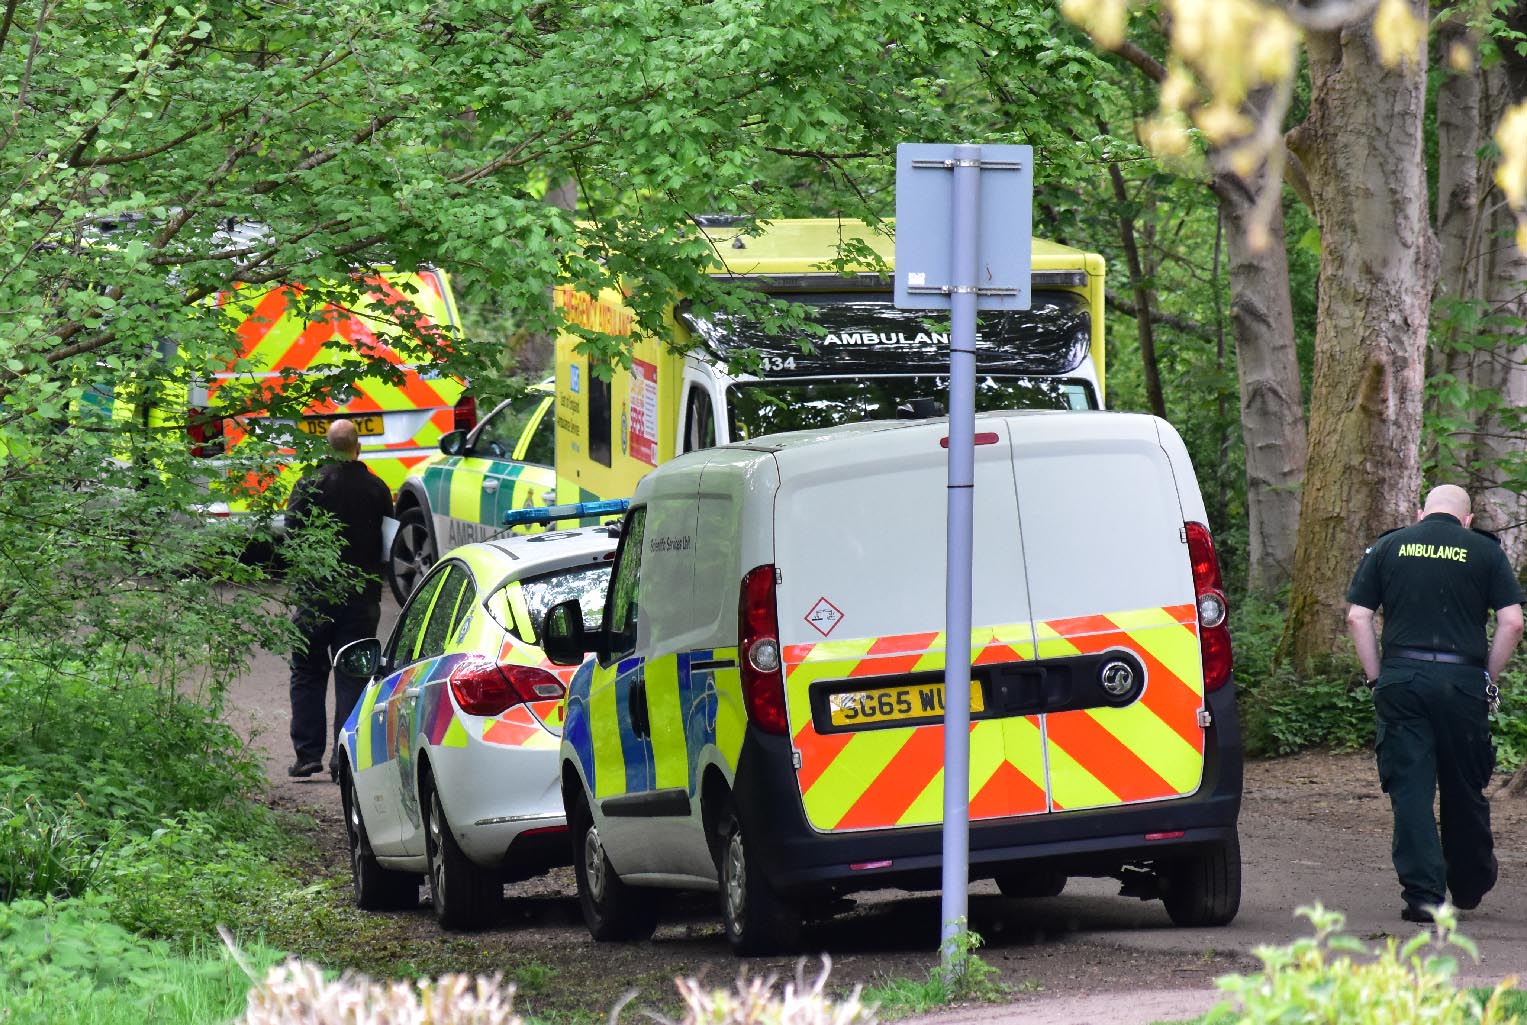 Police at Serious incident by Grand Union Canal Cassiobury Park